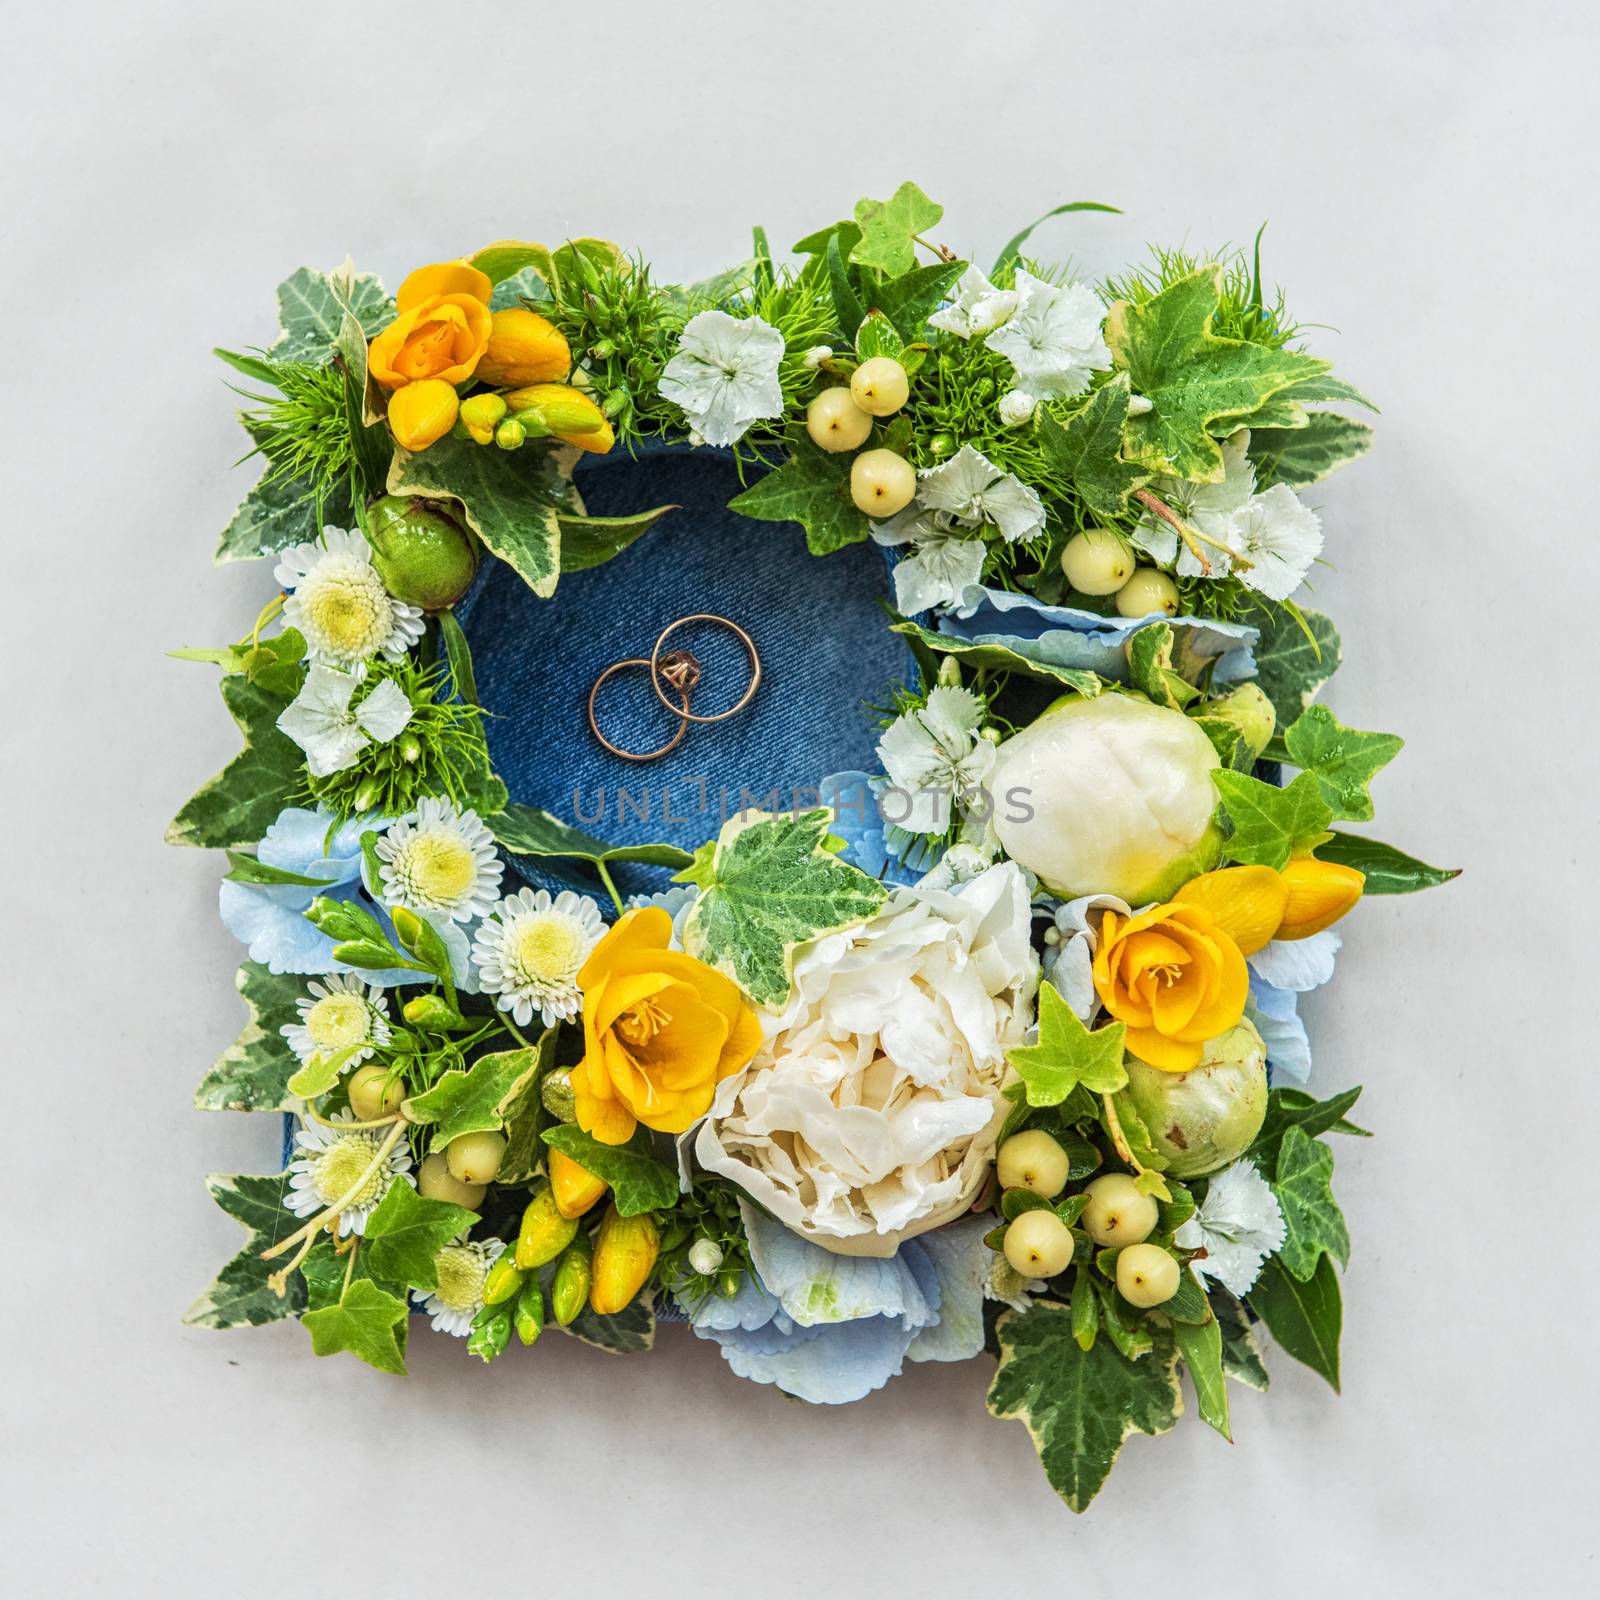 wedding flower composition and rings